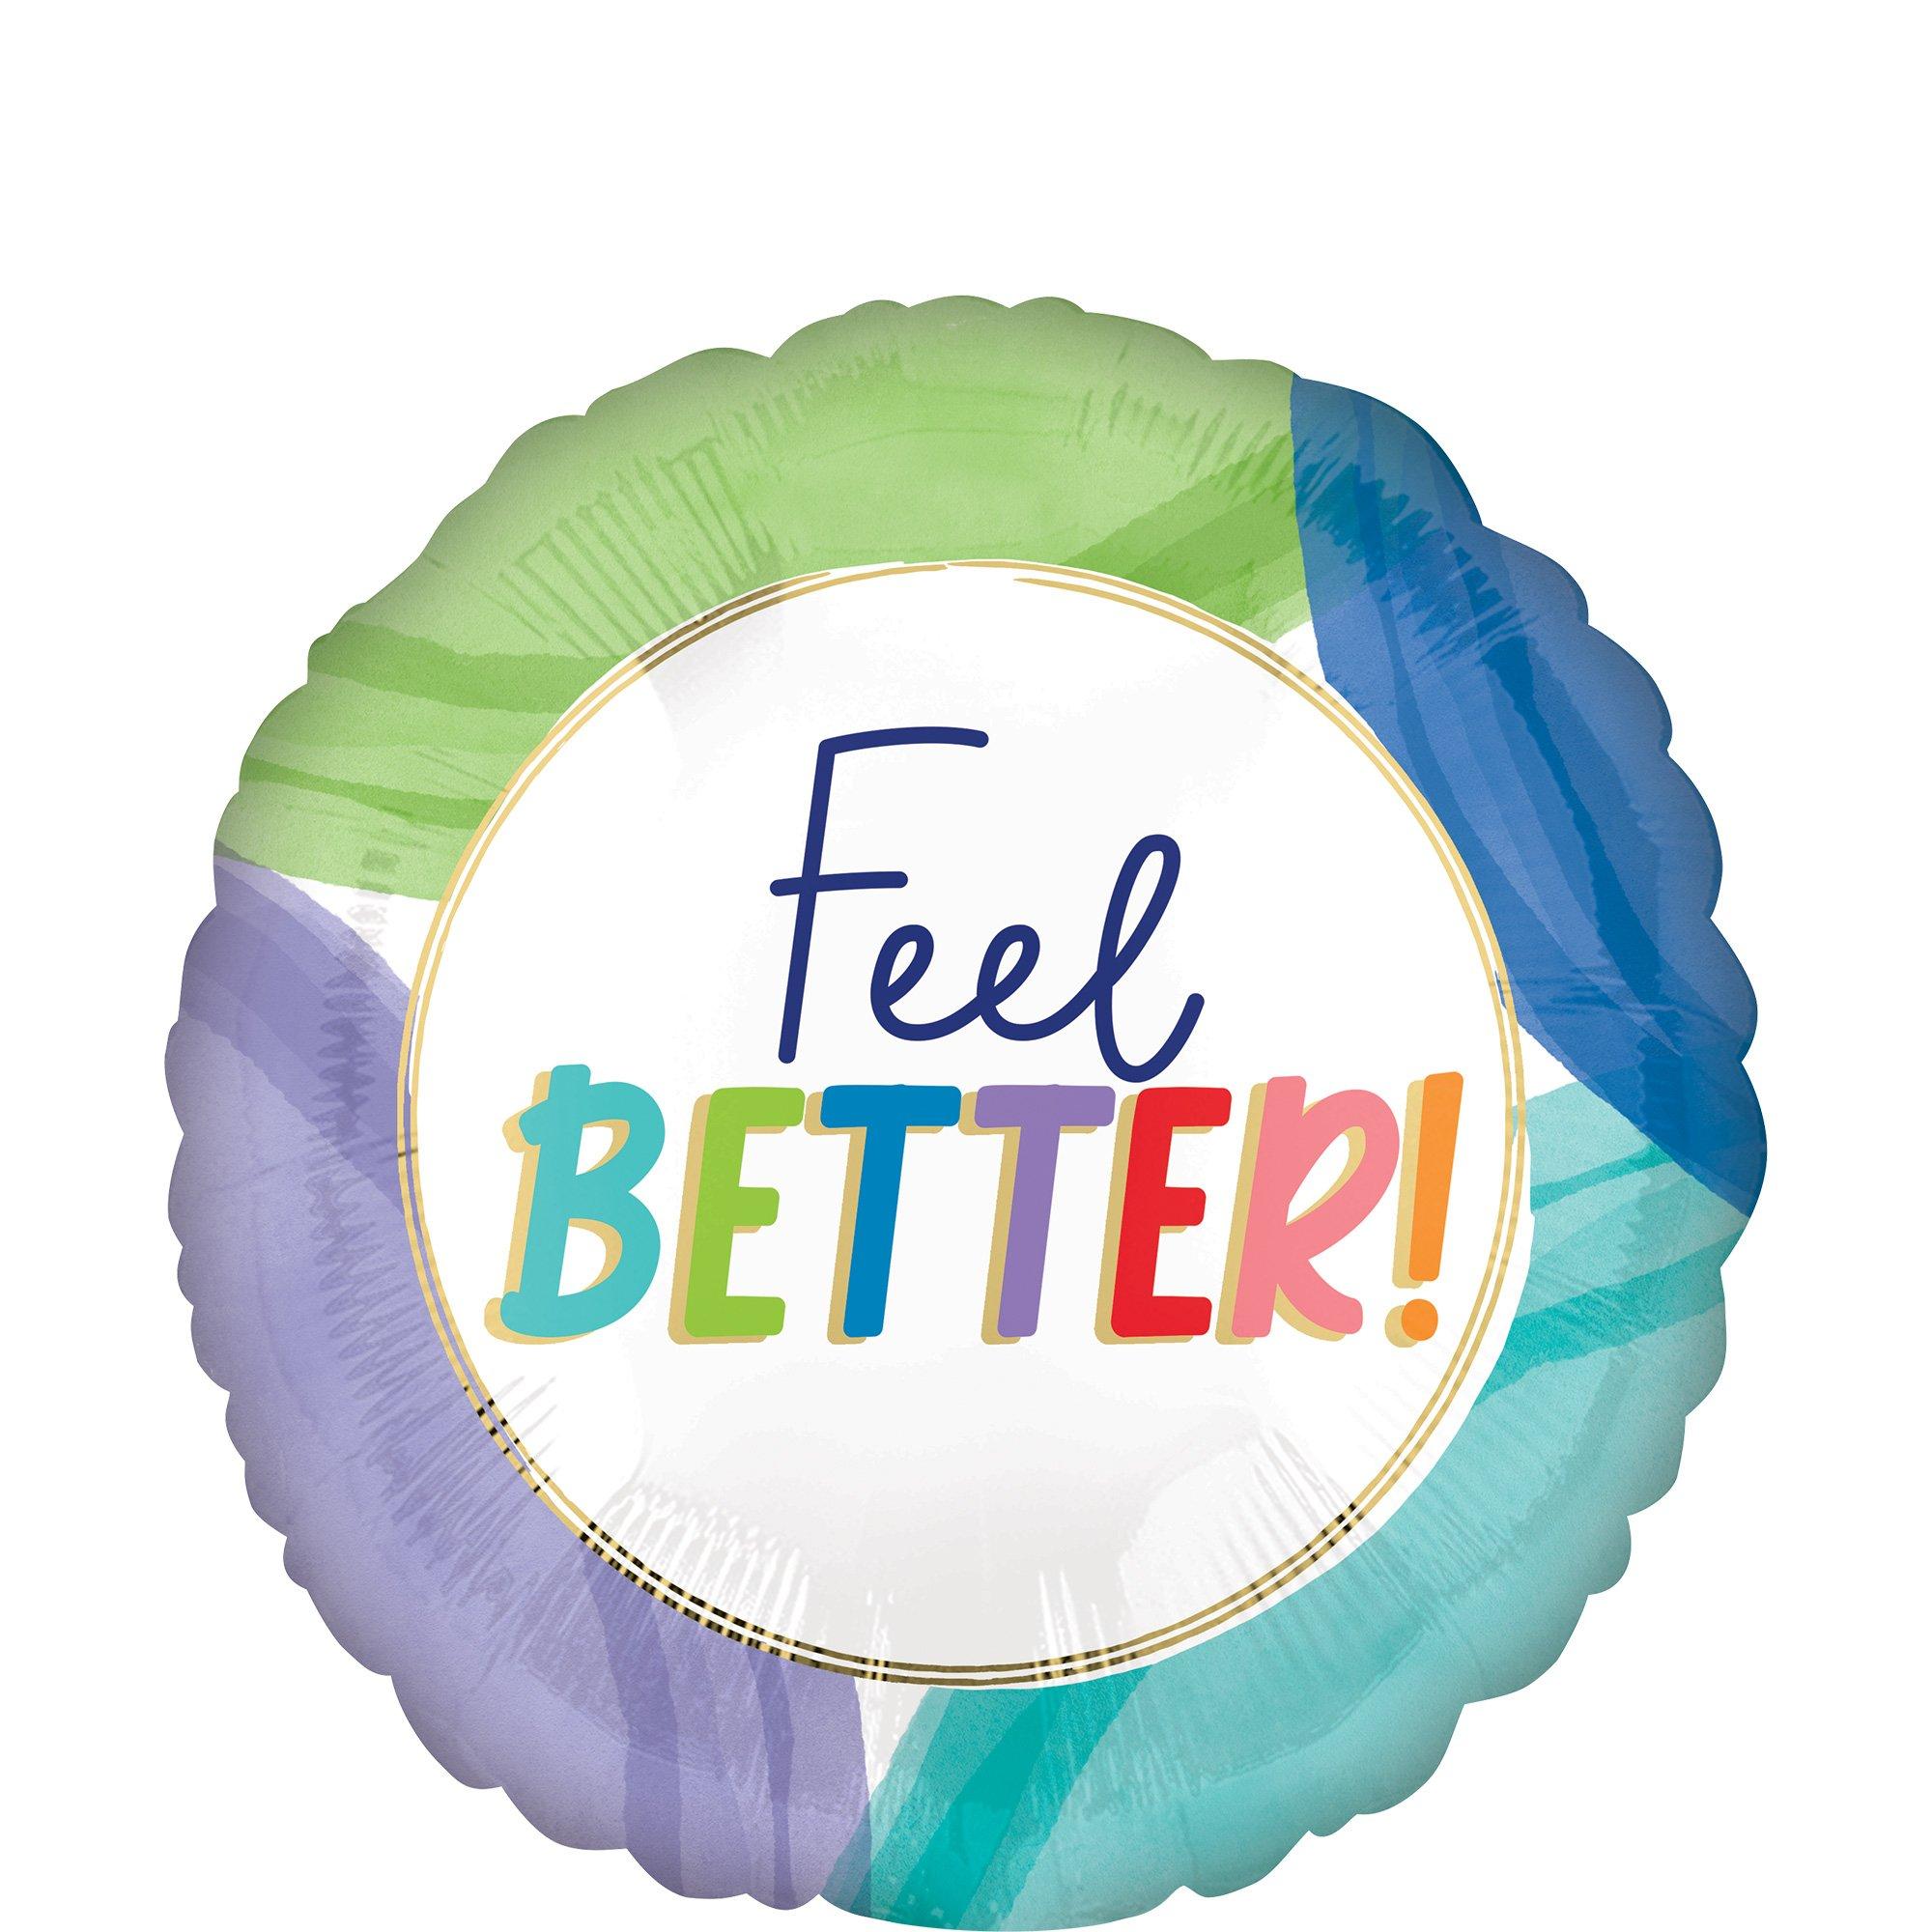 Cutout Collage Feel Better Foil Balloon, 18in